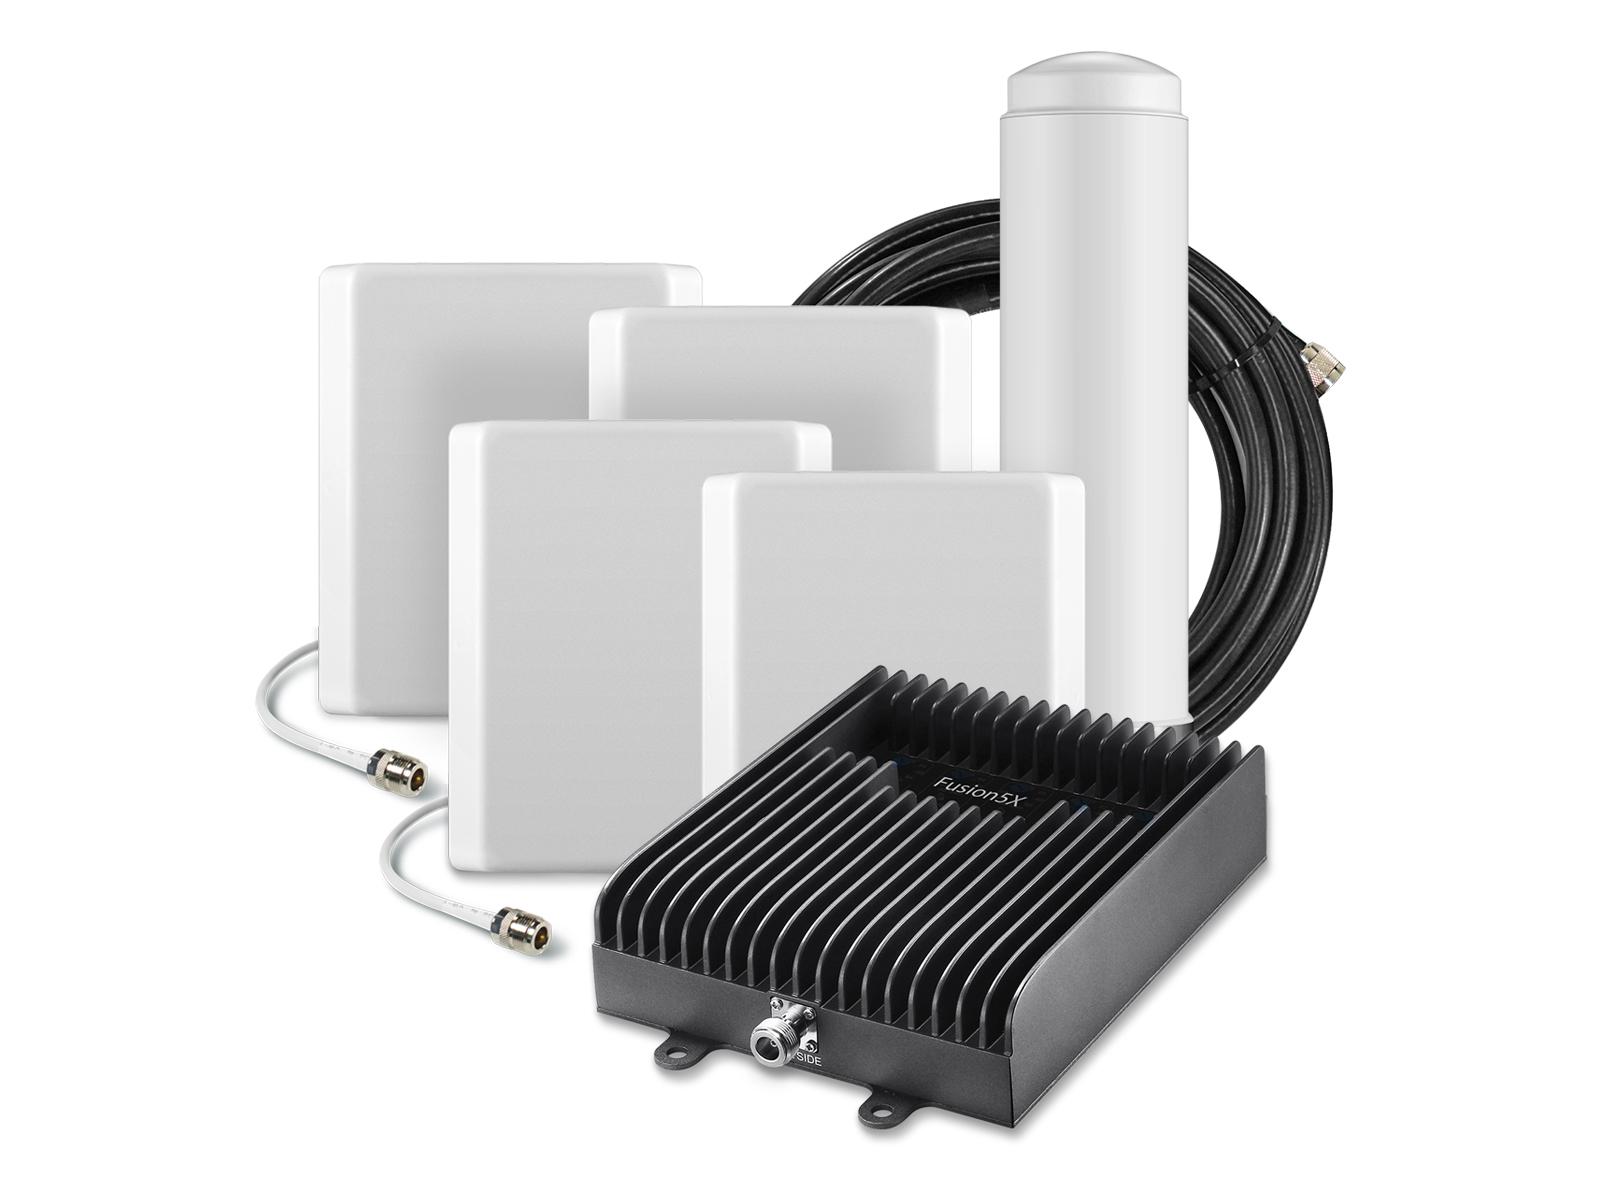 SC-Fusion5X2-O4P Fusion5X 2.0 cell phone signal booster kit with Omni Outside and 4 Panel Inside Antennas by SureCall